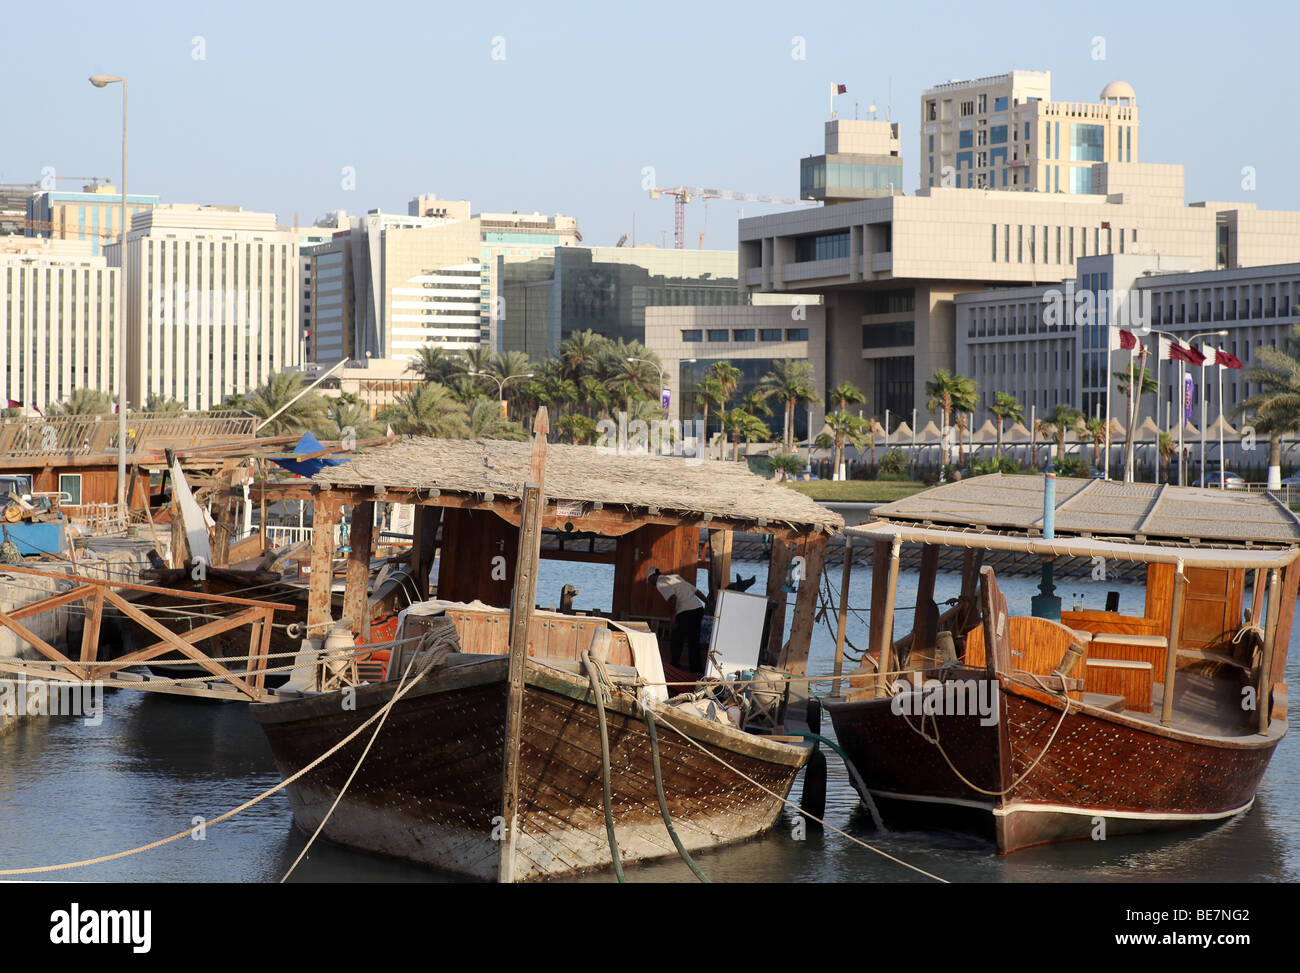 Working dhows moored at the harbour on Doha's Corniche, in Qatar, Arabia. In the background are buildings  from the 60s and 70s. Stock Photo